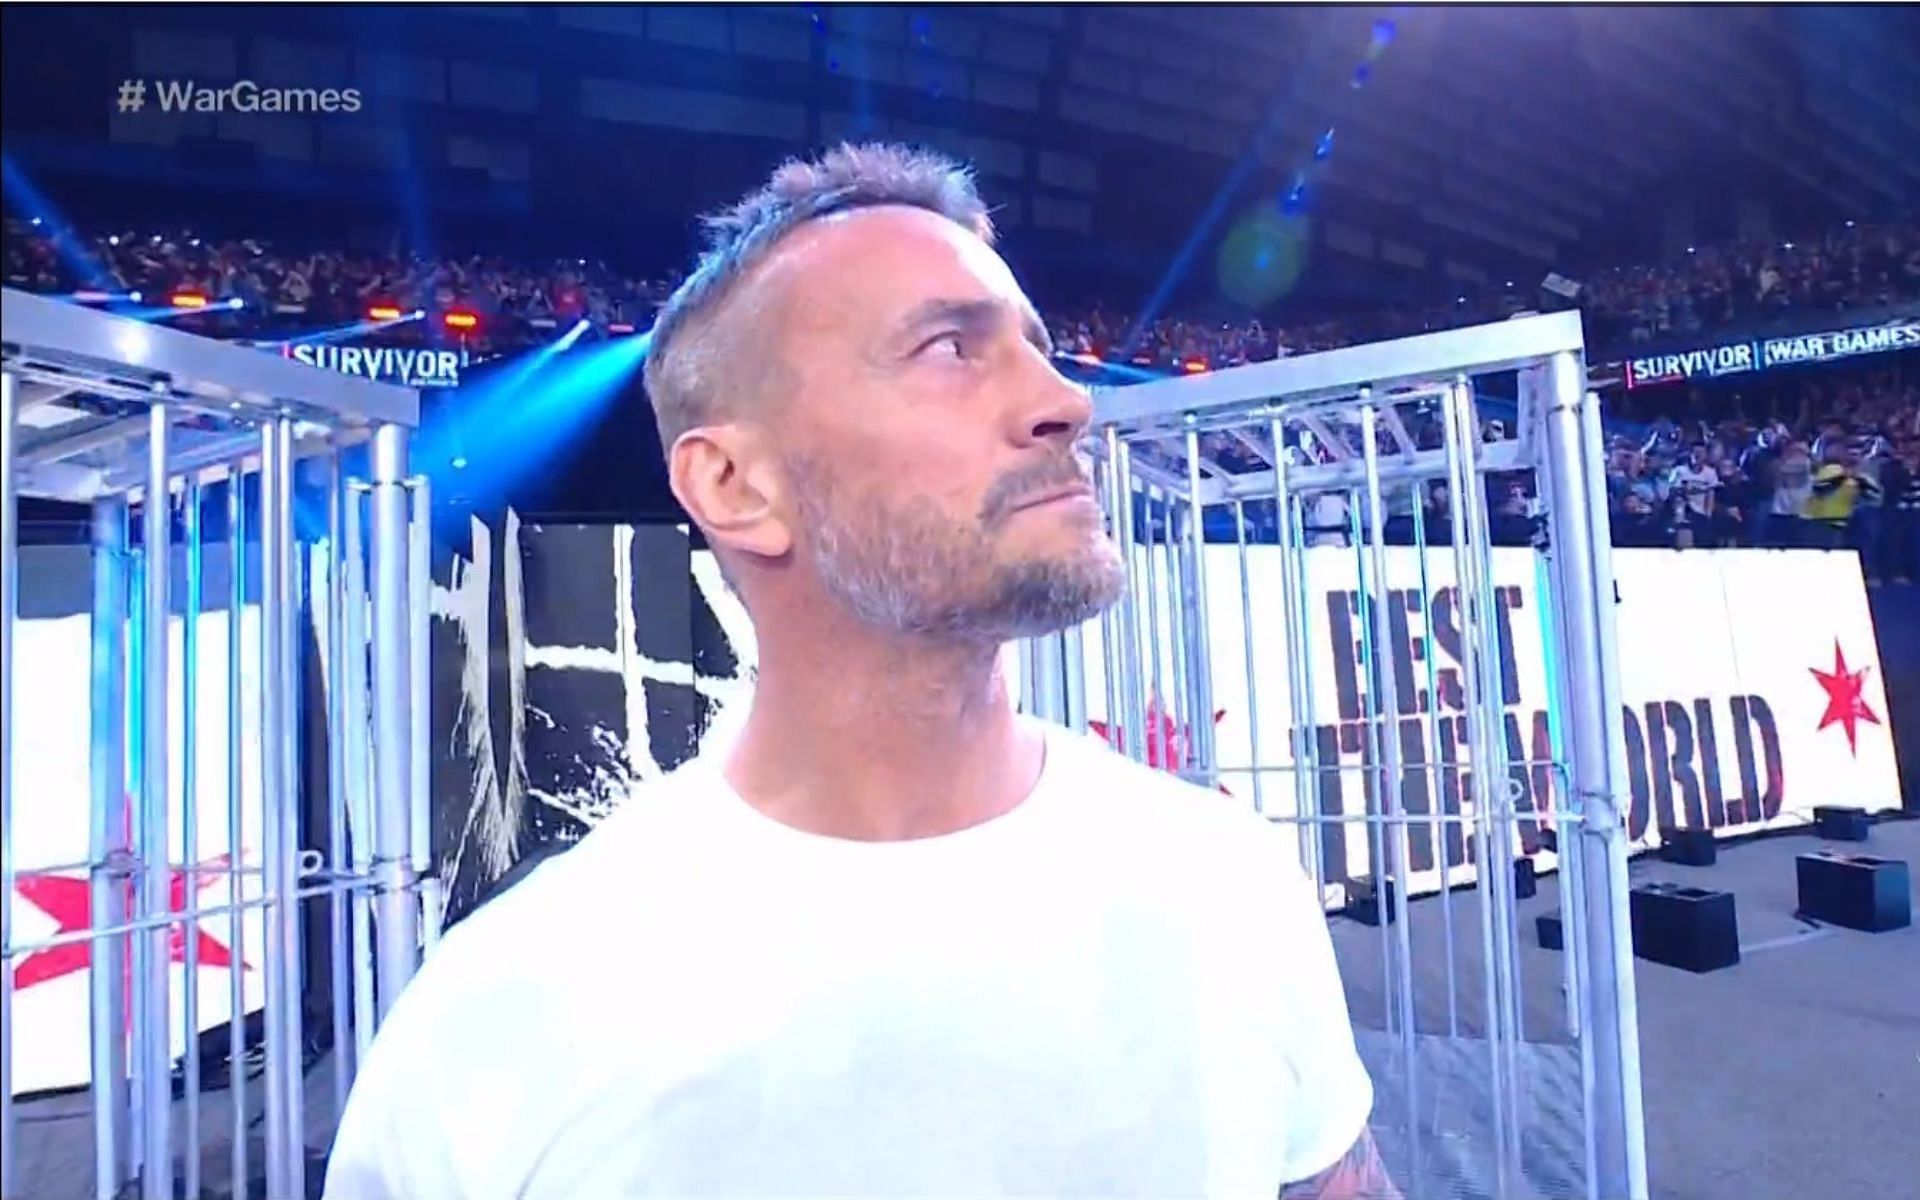 CM Punk officially makes his return to WWE after the main event of Survivor Series: WarGames